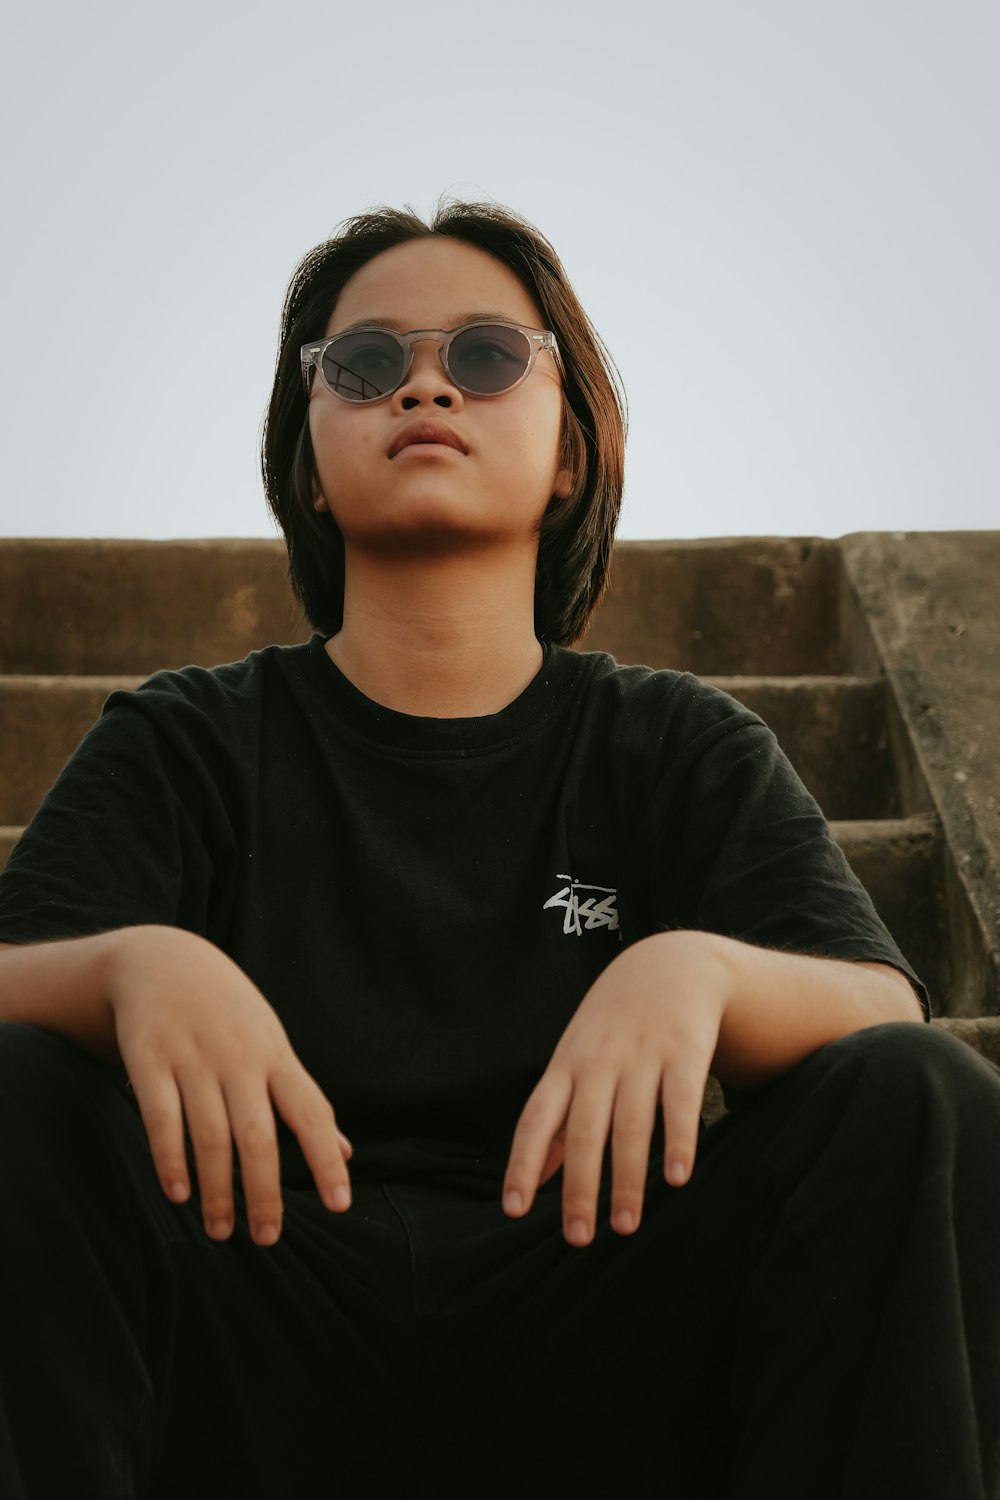 a person sitting on some steps wearing sunglasses